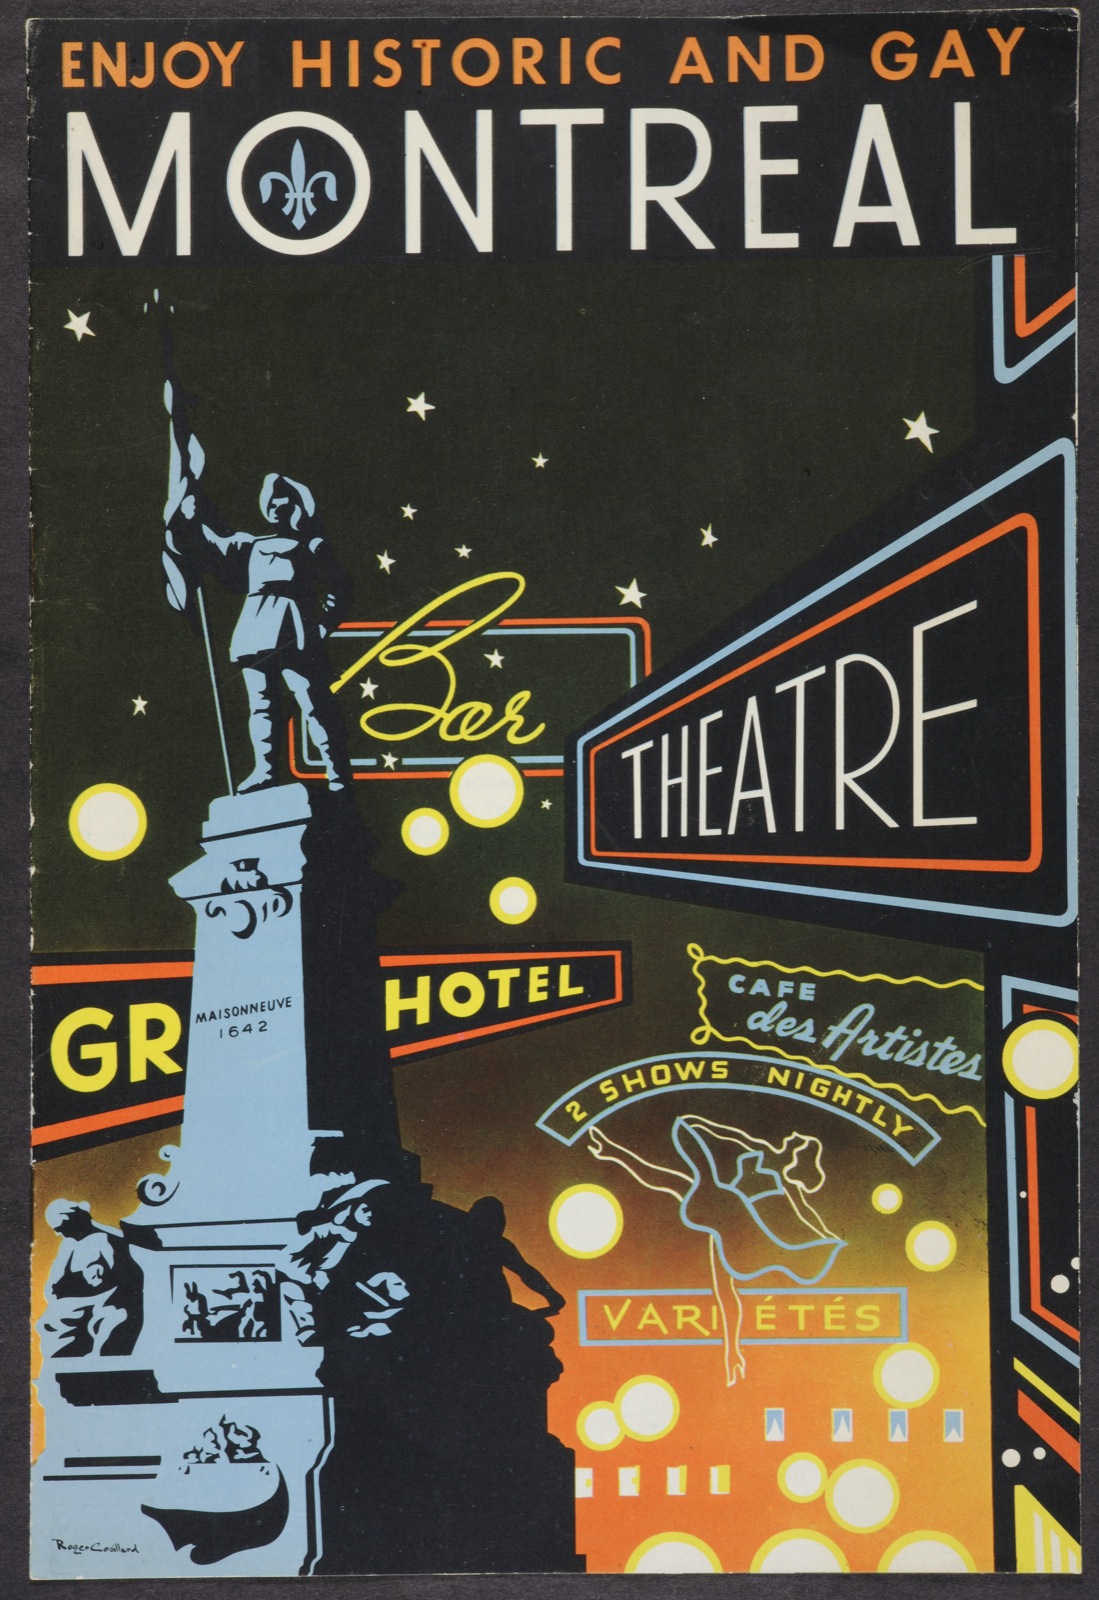 Front cover of 'Enjoy historic and gay Montreal' pamphlet published by the Montreal Tourist & Convention Bureau in the 1950s.